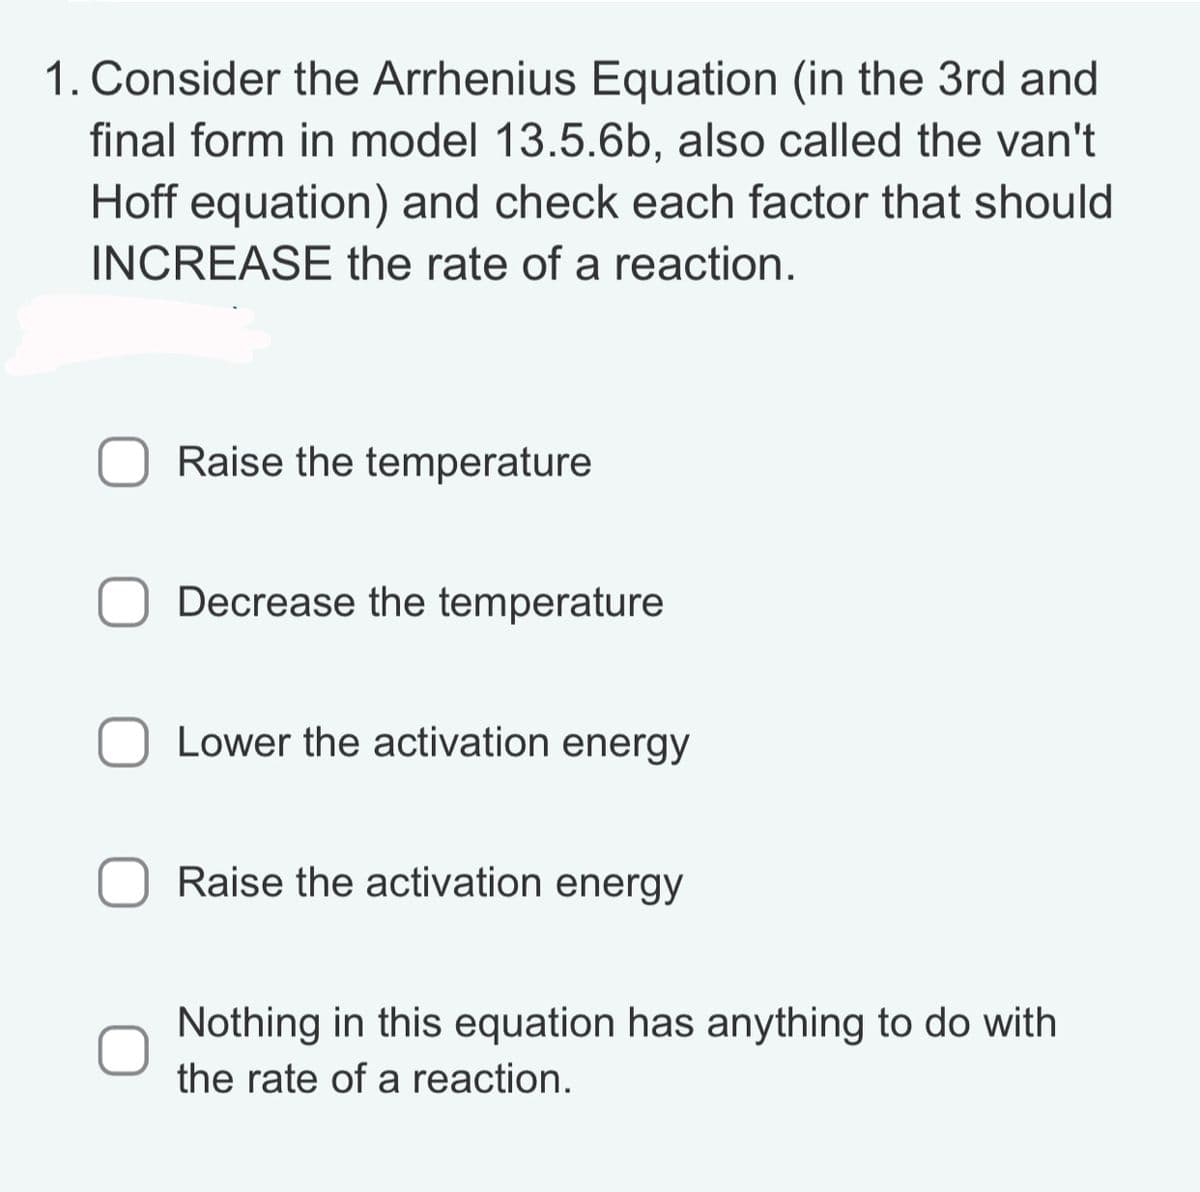 1. Consider the Arrhenius Equation (in the 3rd and
final form in model 13.5.6b, also called the van't
Hoff equation) and check each factor that should
INCREASE the rate of a reaction.
Raise the temperature
Decrease the temperature
Lower the activation energy
Raise the activation energy
Nothing in this equation has anything to do with
the rate of a reaction.